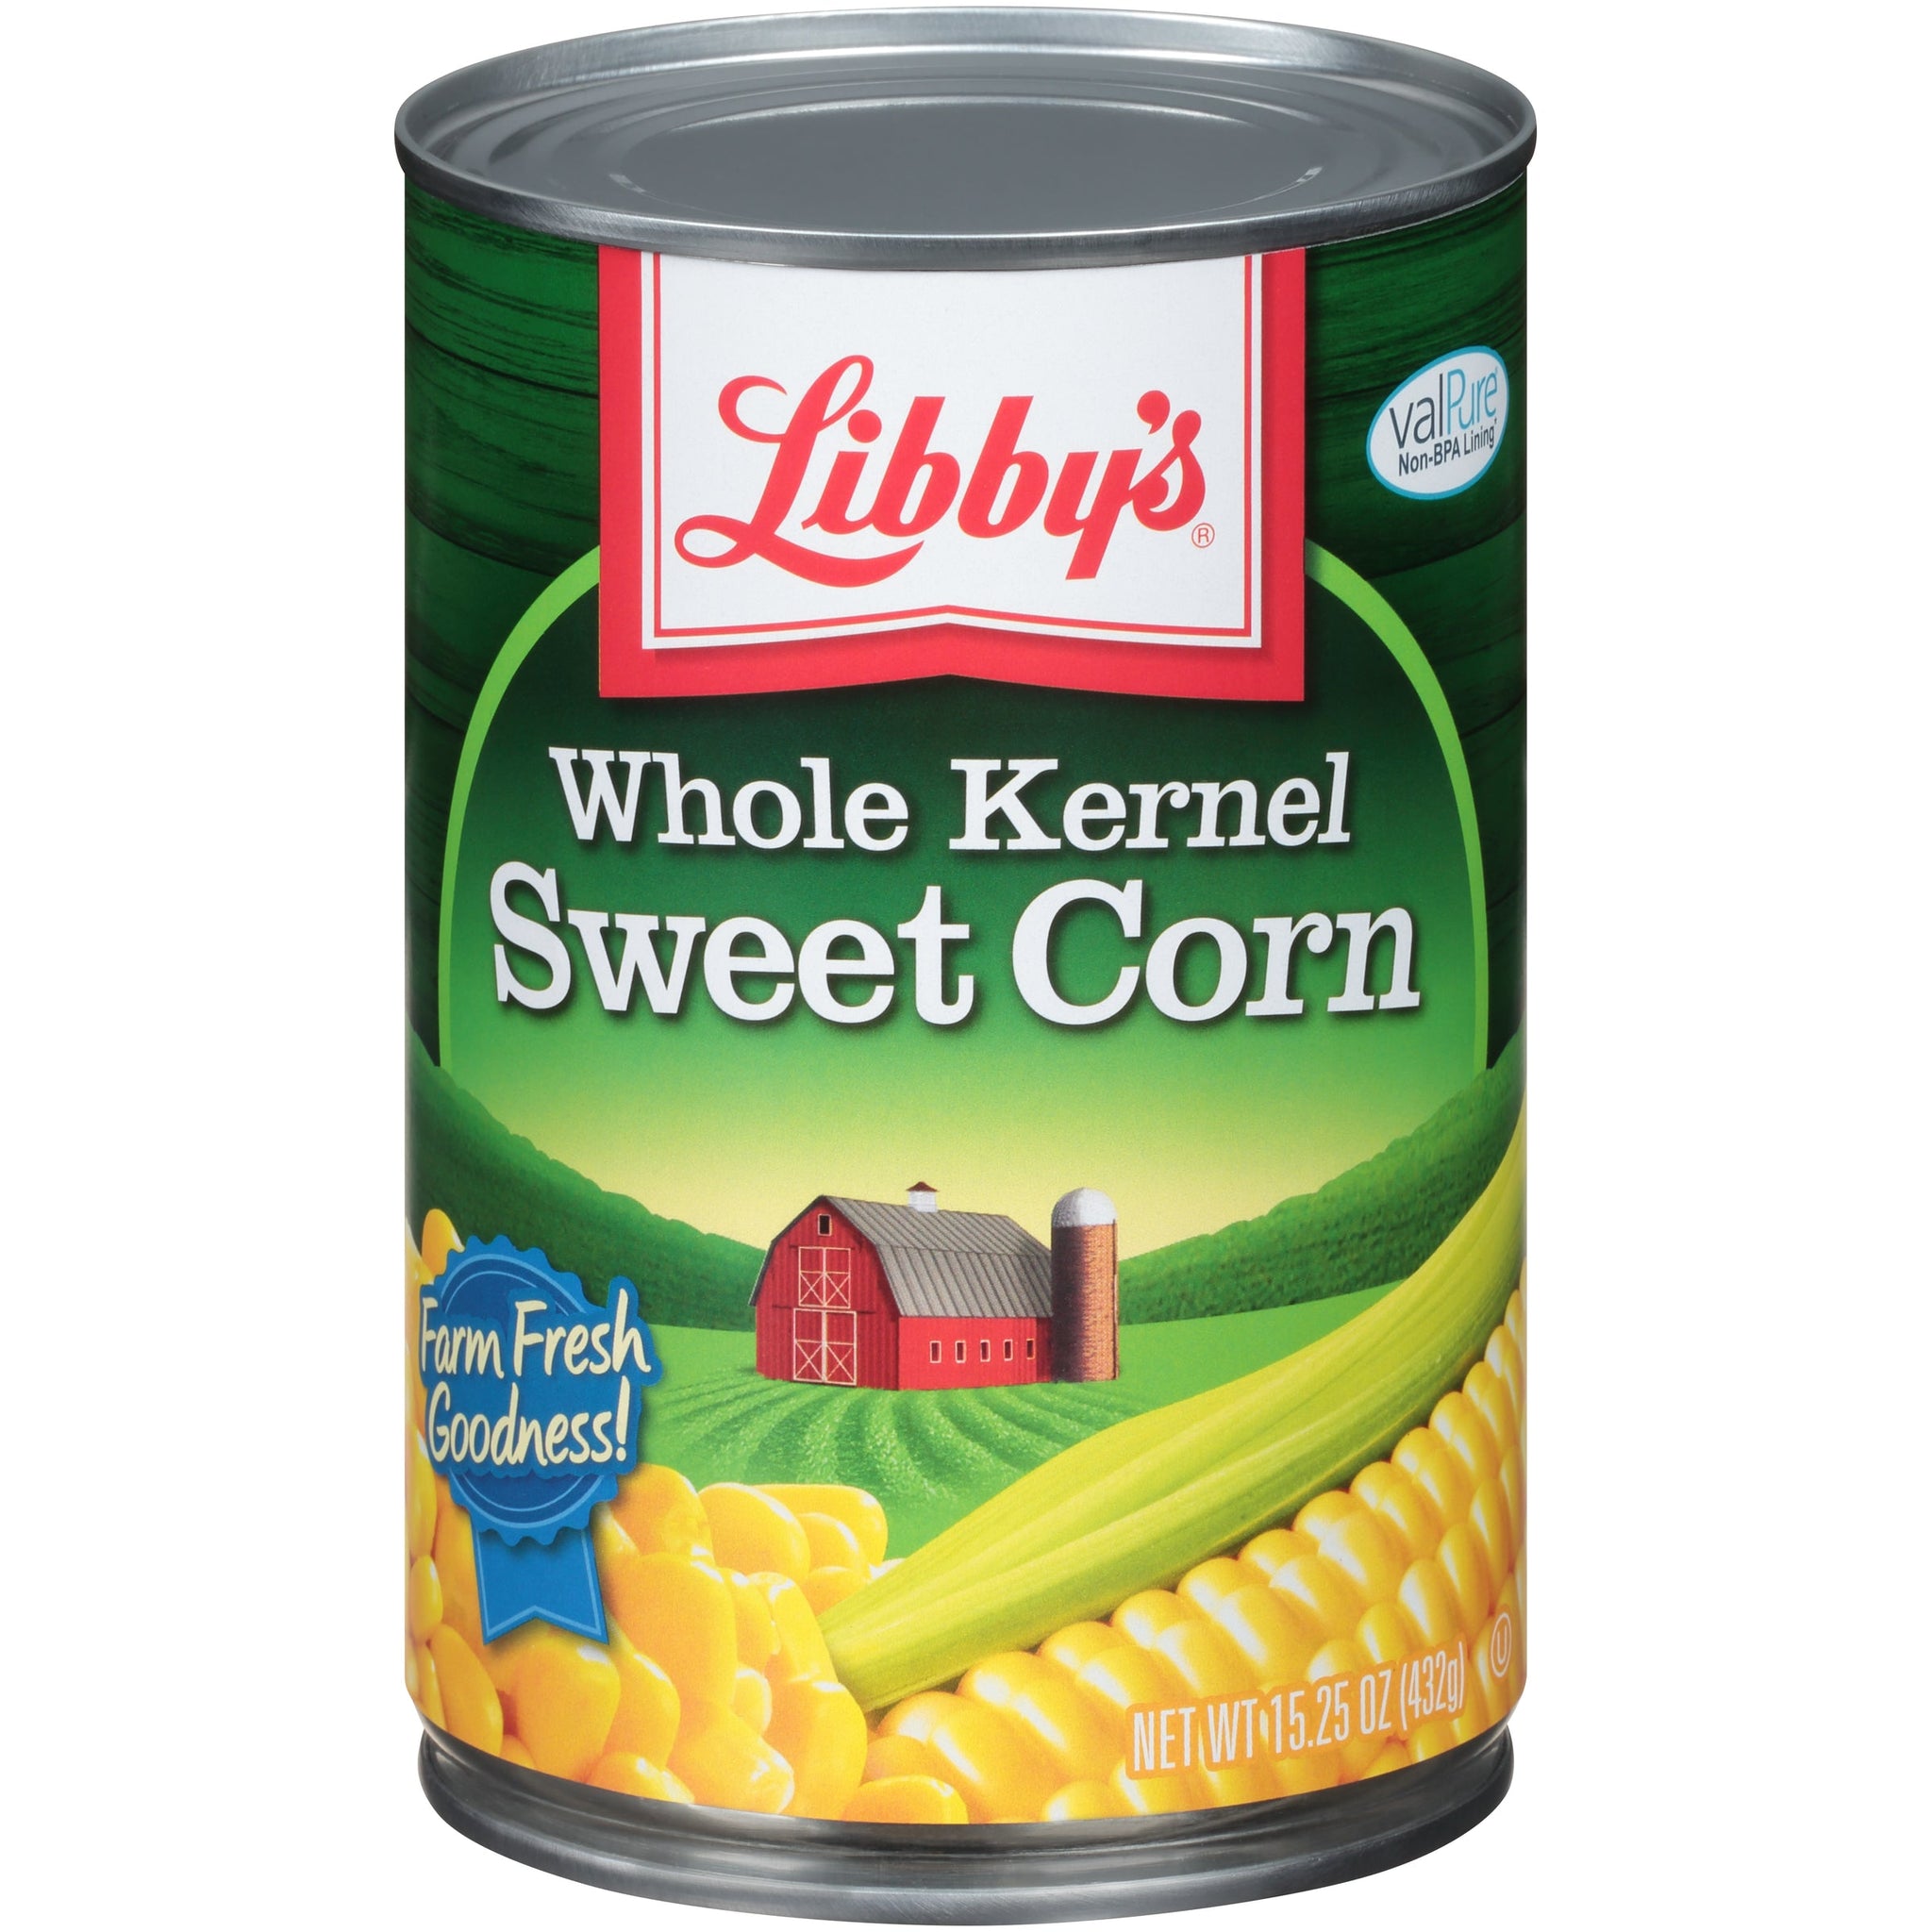 stl>Libby's Whole Kernel Sweet Corn, Canned - 432g